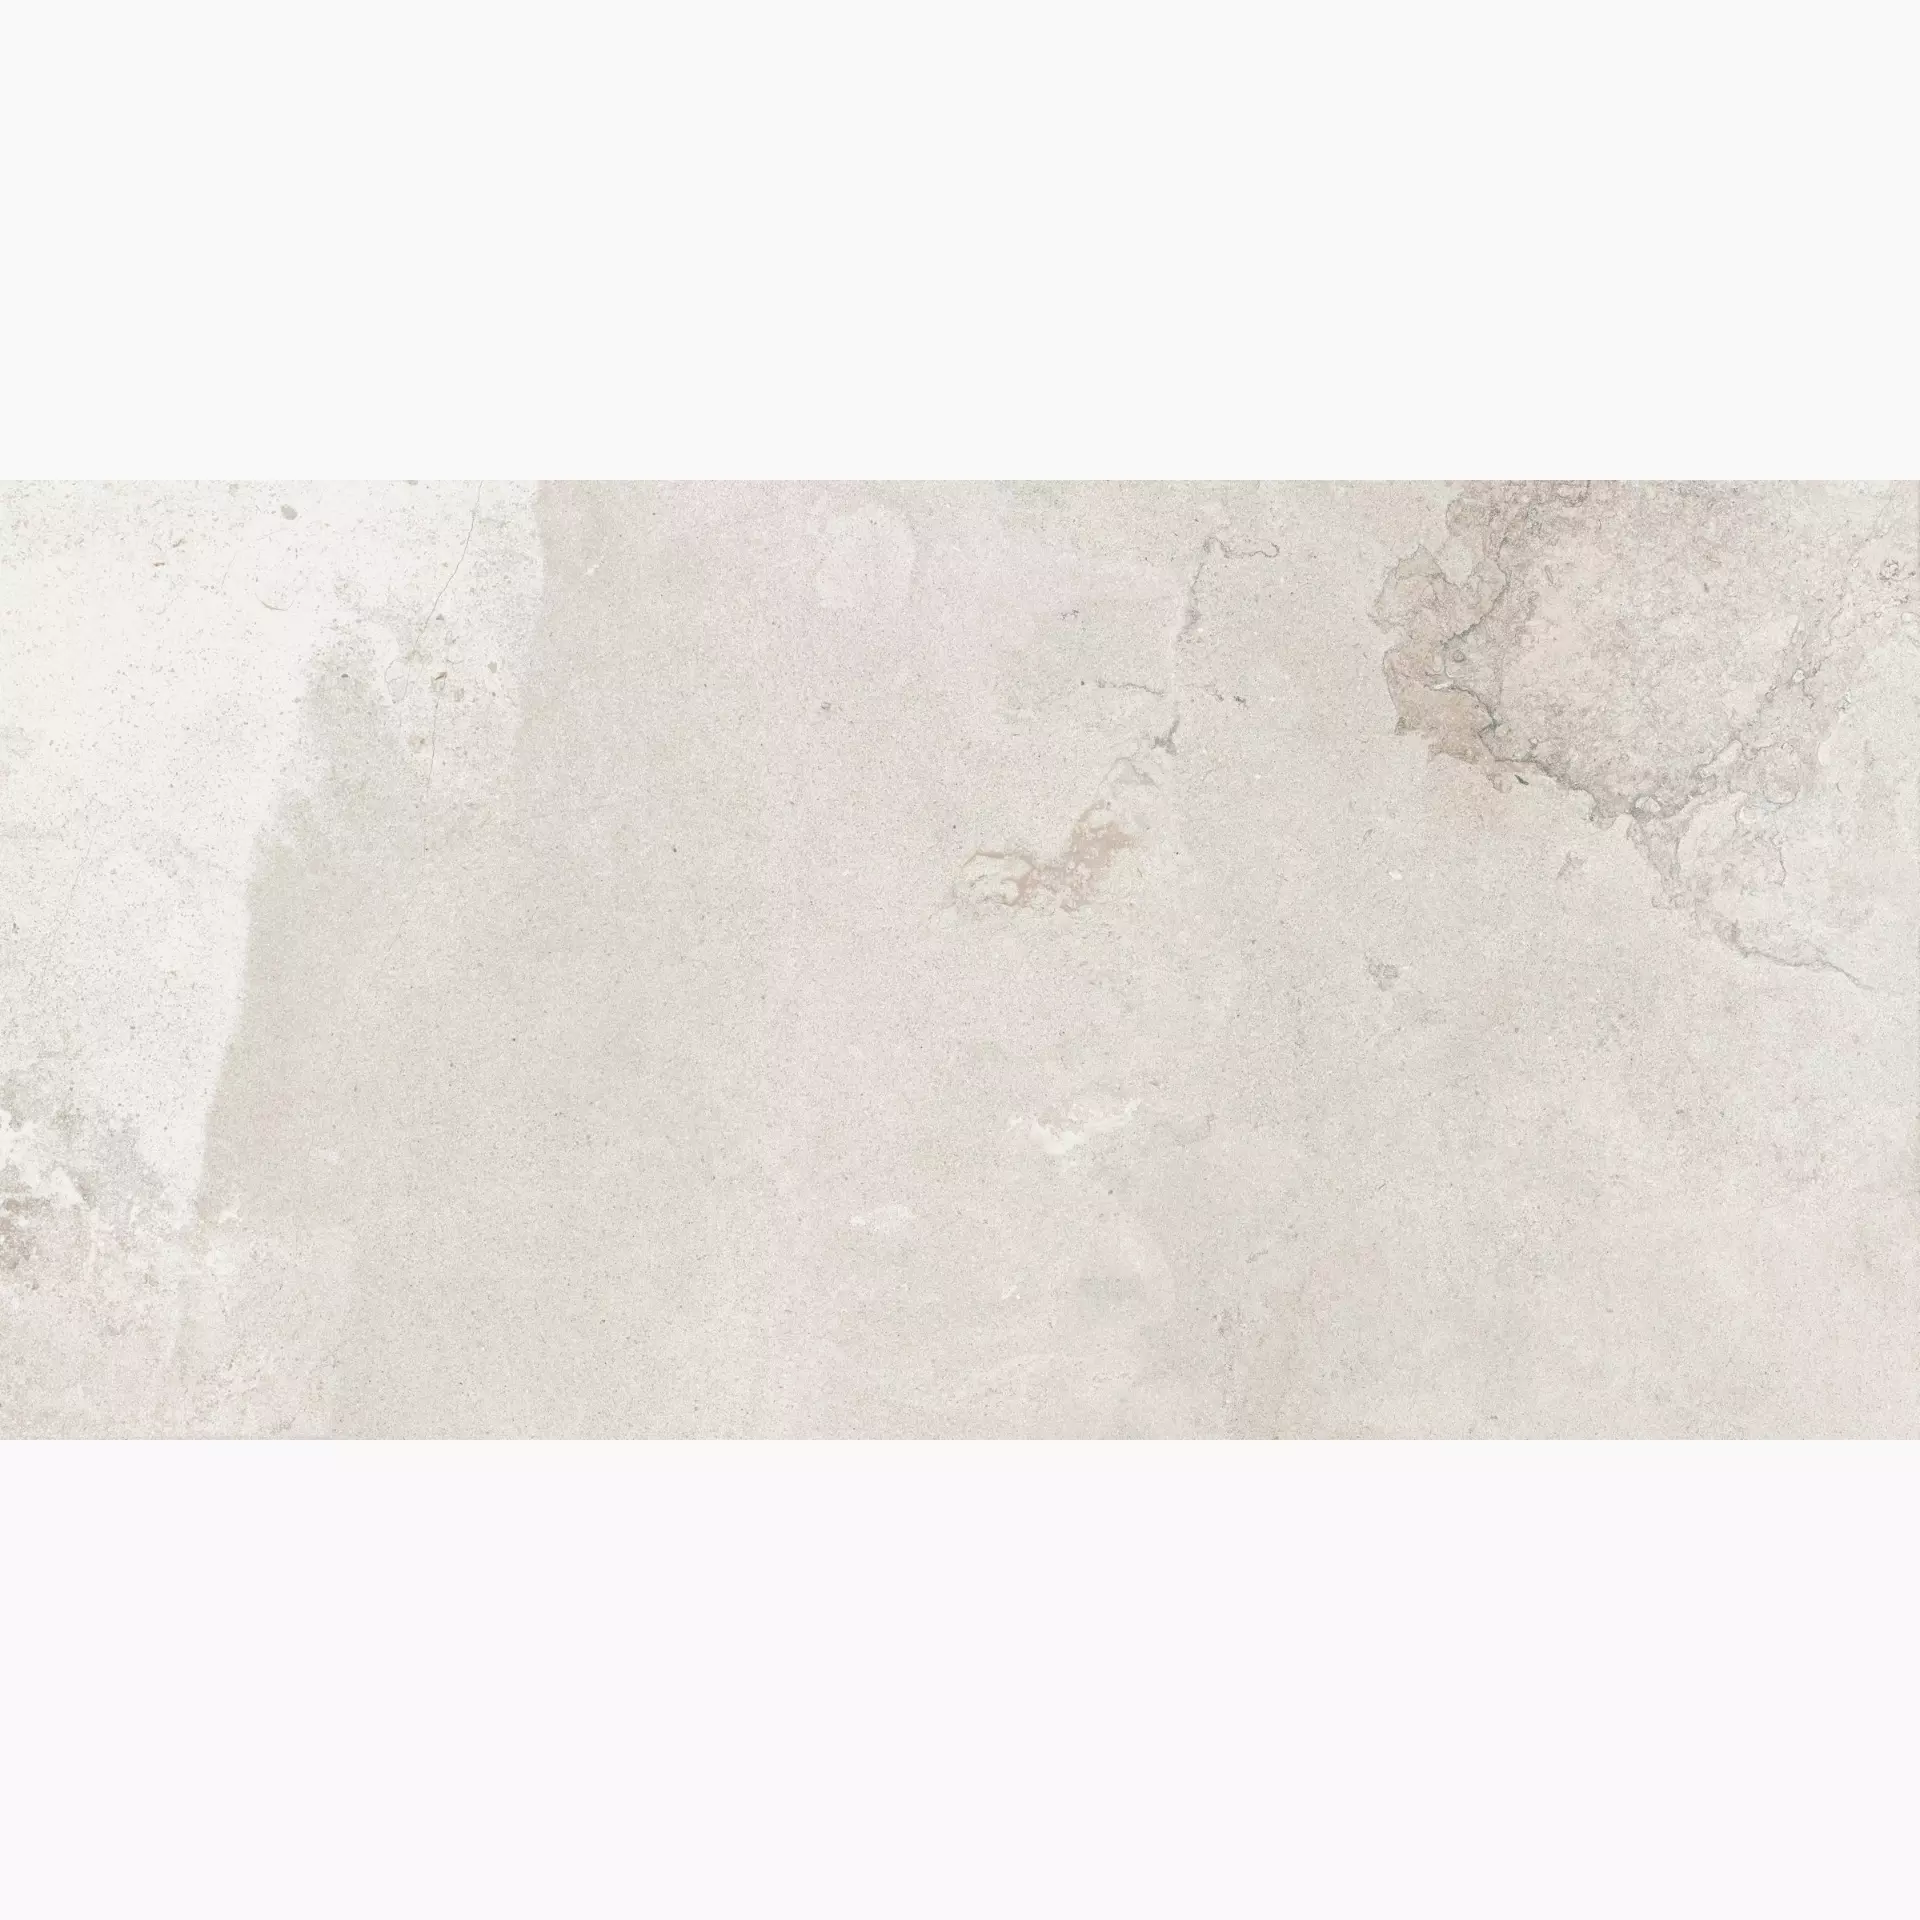 ABK Alpes Raw Ivory Naturale PF60000006 60x120cm rectified 8,5mm